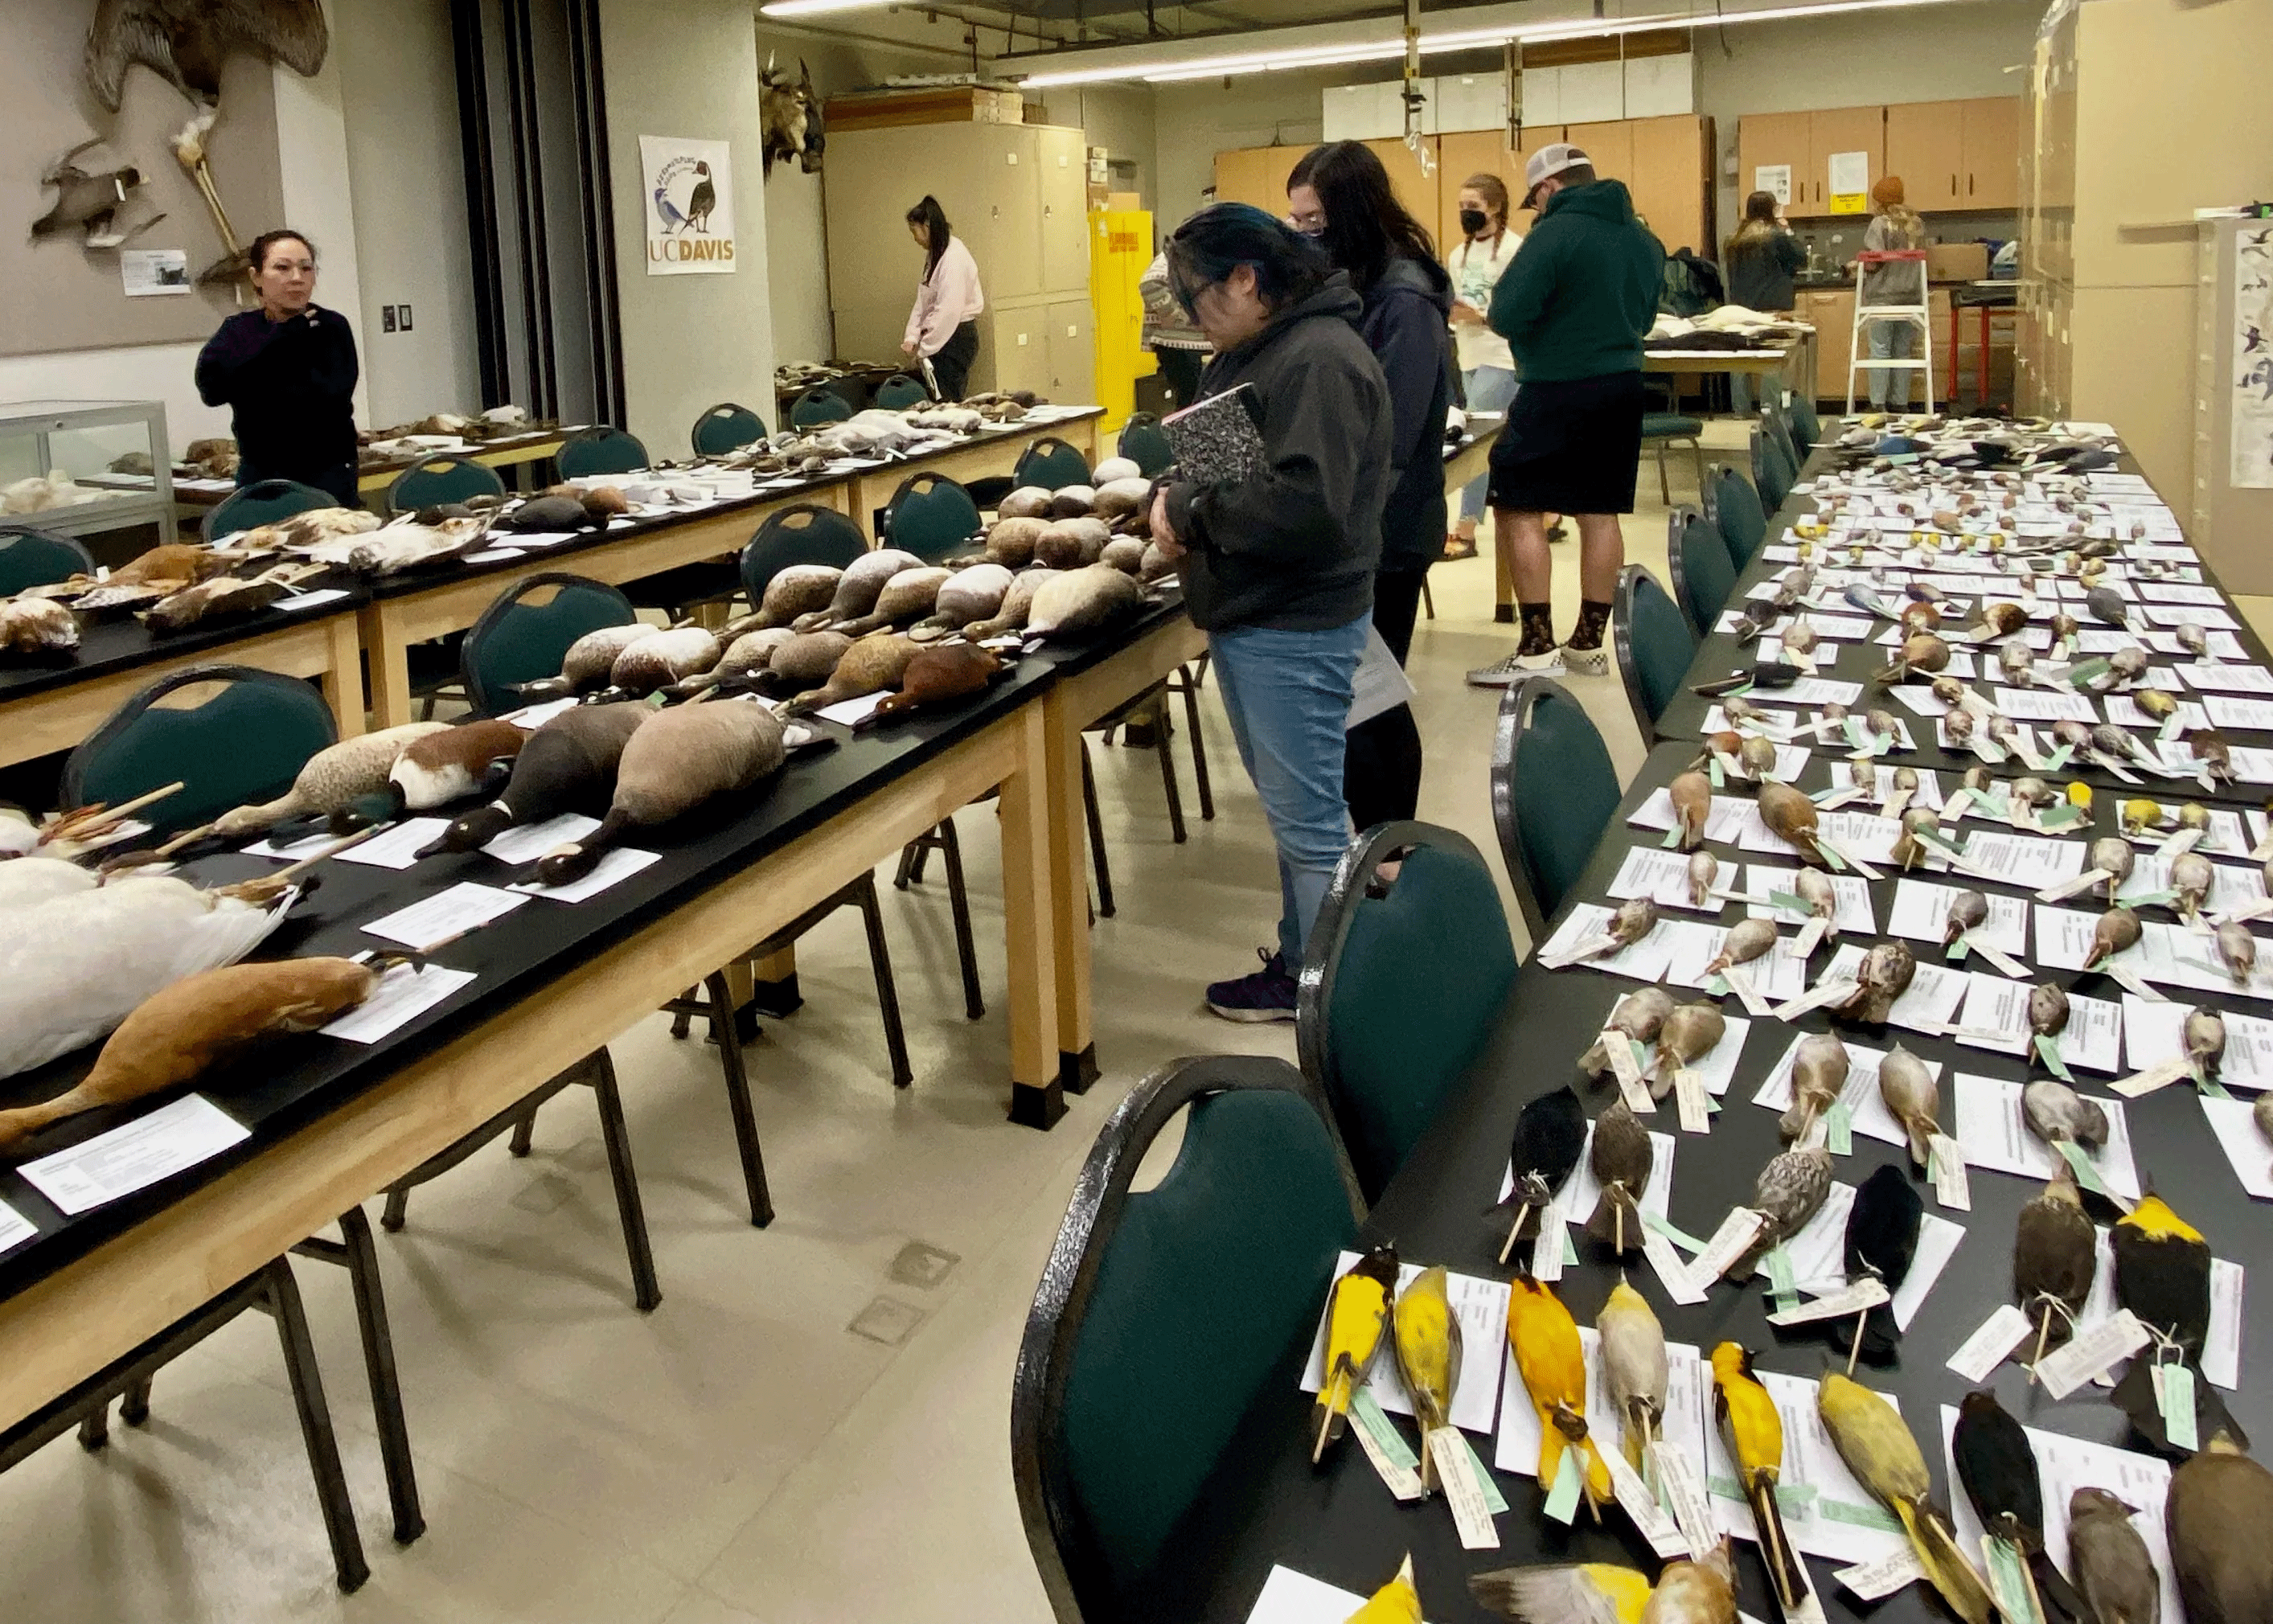 Class in session. Students from WFC 111L study perfectly preserved bird specimens lining the tables as part of the UC Davis course "Laboratory in Biology & Conservation of Wild Birds." (Malia Reiss, UC Davis)